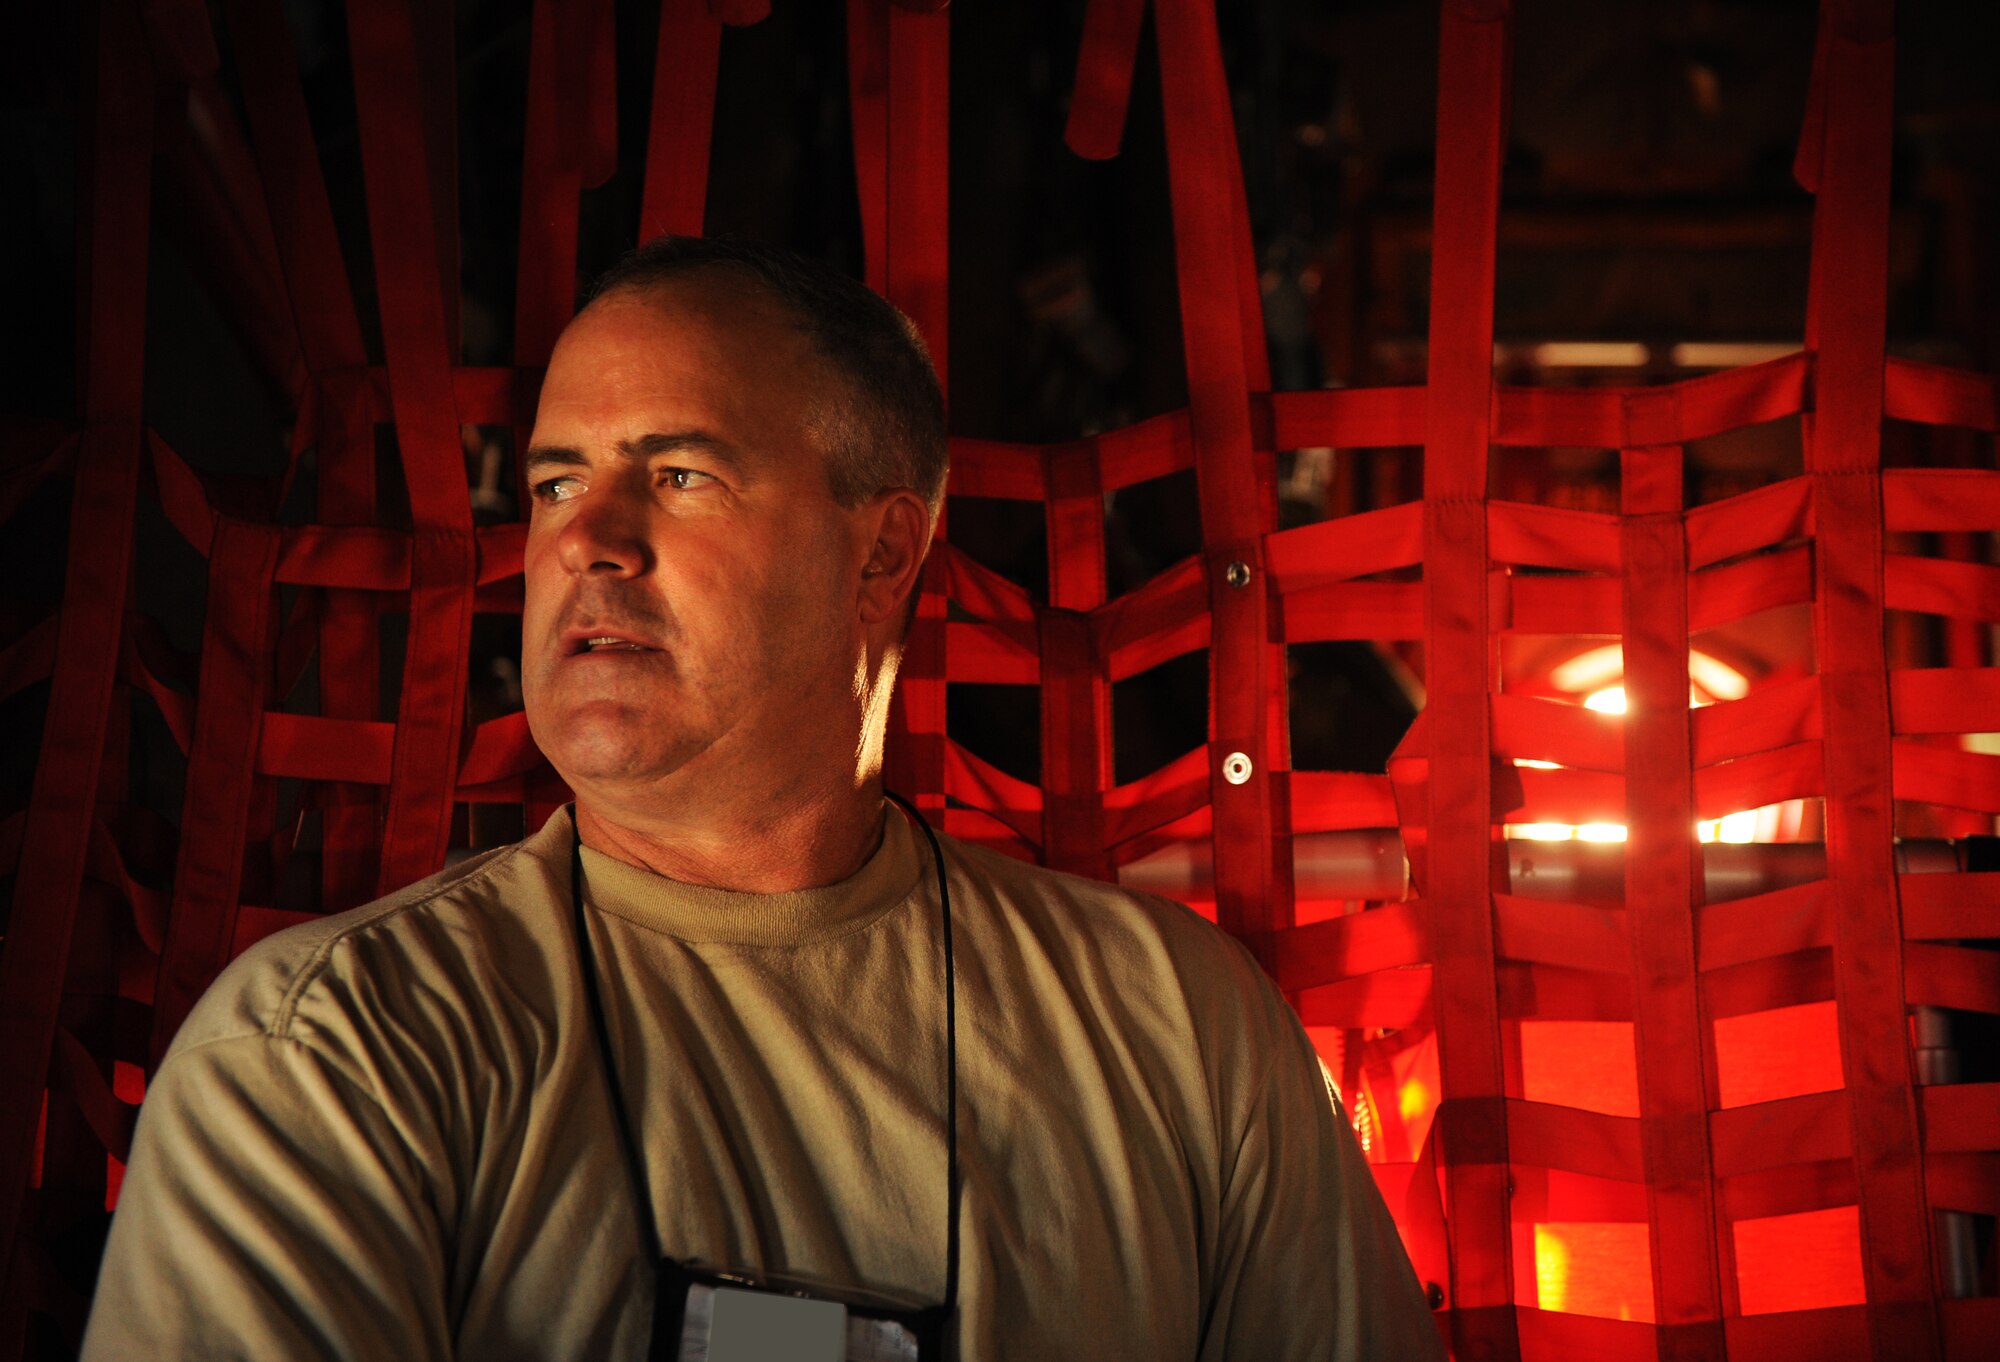 SOUTHWEST ASIA – Master Sgt. Thomas Donnelly, 746th Expeditionary Aircraft Maintenance Unit electrical and environmental systems supervisor and native of Cloquet, Minn., takes a break inside a C-130H3 Hercules during a home station check here Feb. 28, 2012. Donnelly has worked on the C-130 for 31 years, starting out as active-duty and then transitioning to the reserve component. He has worked on the C-130 through three Air Force career fields, including fuel systems, hydraulics, and now electrical and environmental systems. (U.S. Air Force photo/Staff Sgt. Nathanael Callon)